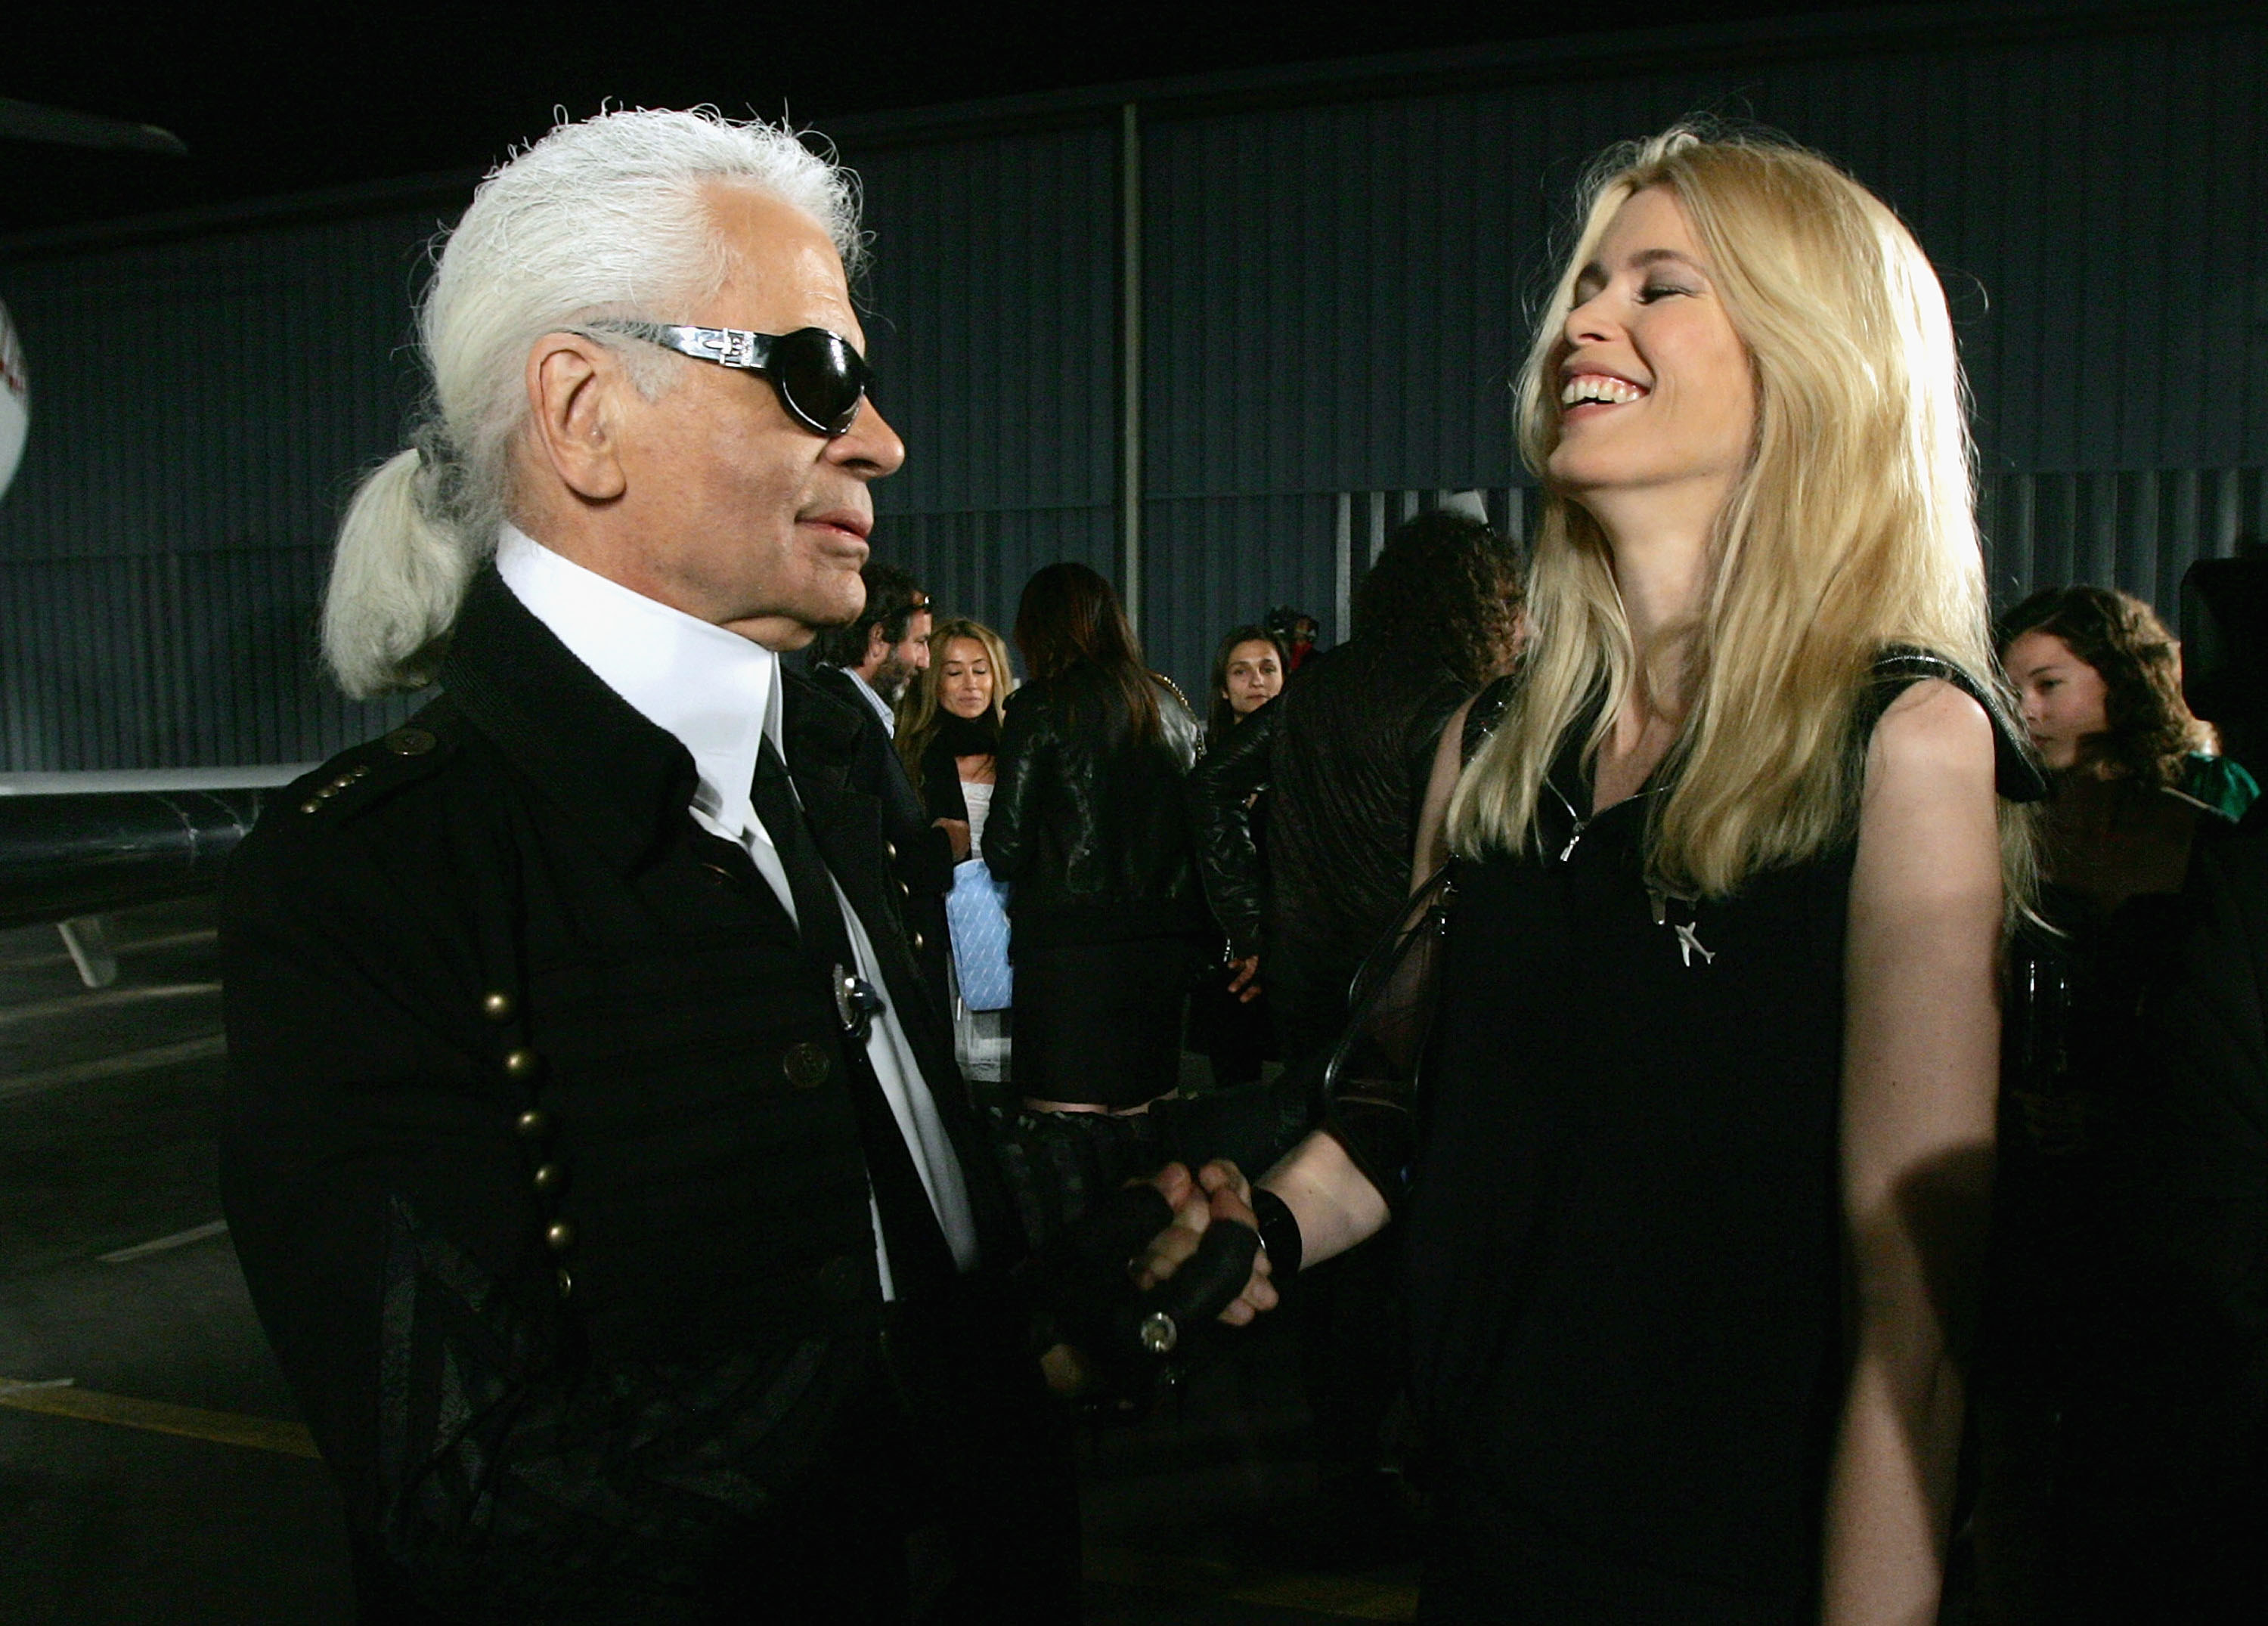 Karl Lagerfeld and Claudia Schiffer